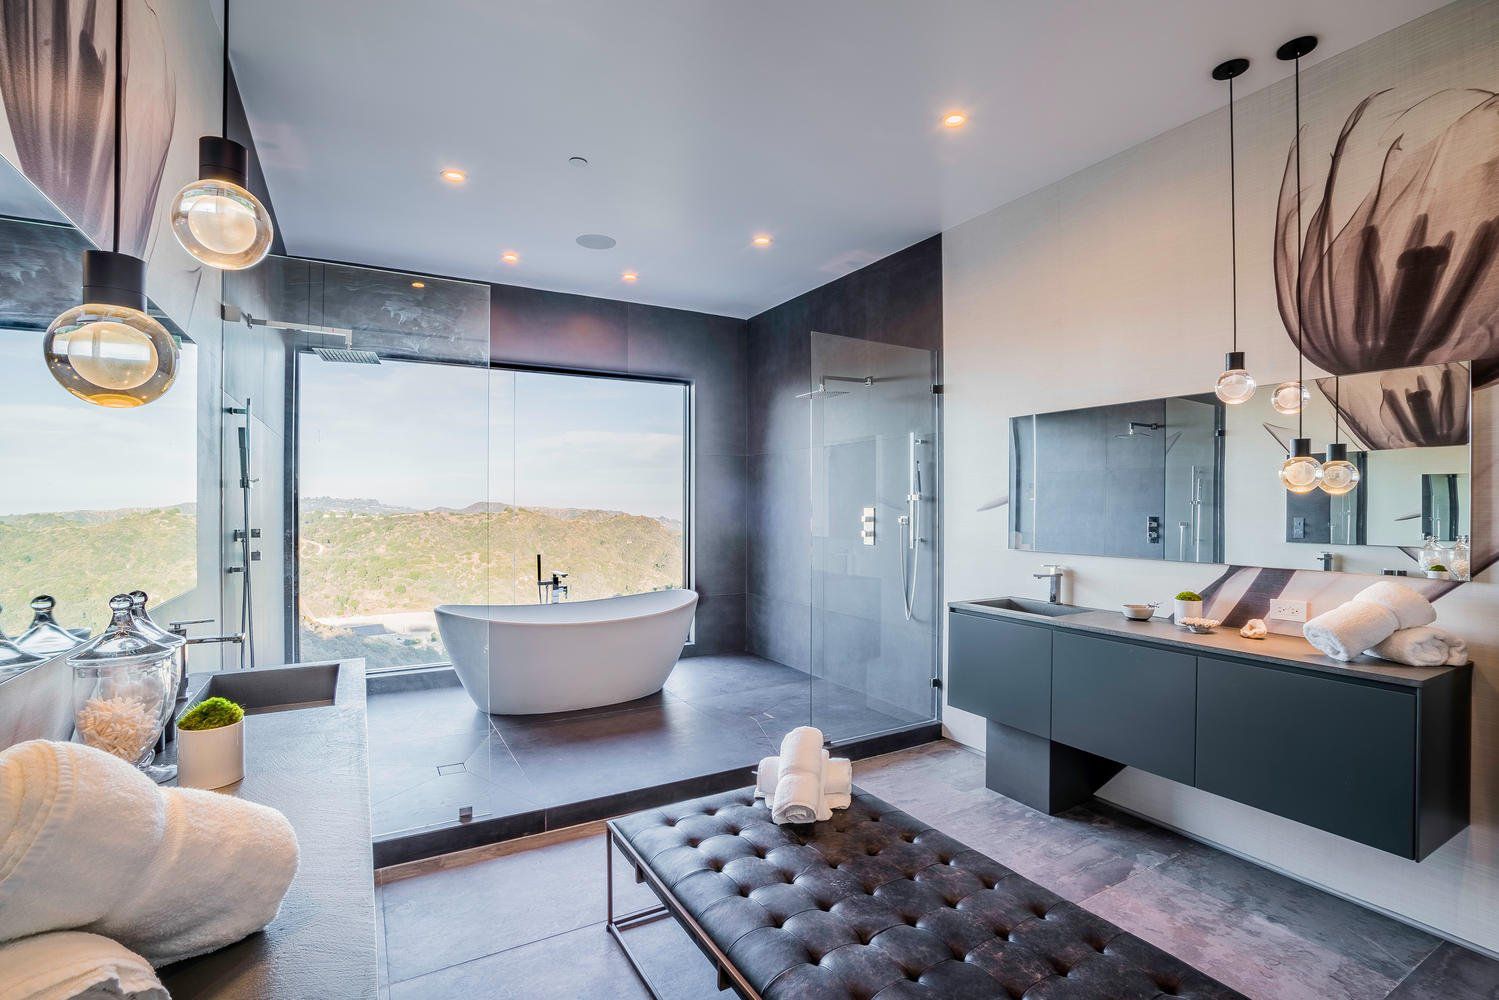 After a hard day, a master bathroom should be a tranquil hideaway where you may soak in the tub or take a refreshing shower. Every material, accent, and piece of furniture should enhance the space's atmosphere. Fortunately, elements like the hottest décor trends, bathroom tile trends for 2023, and more will make any primary bathroom shine.